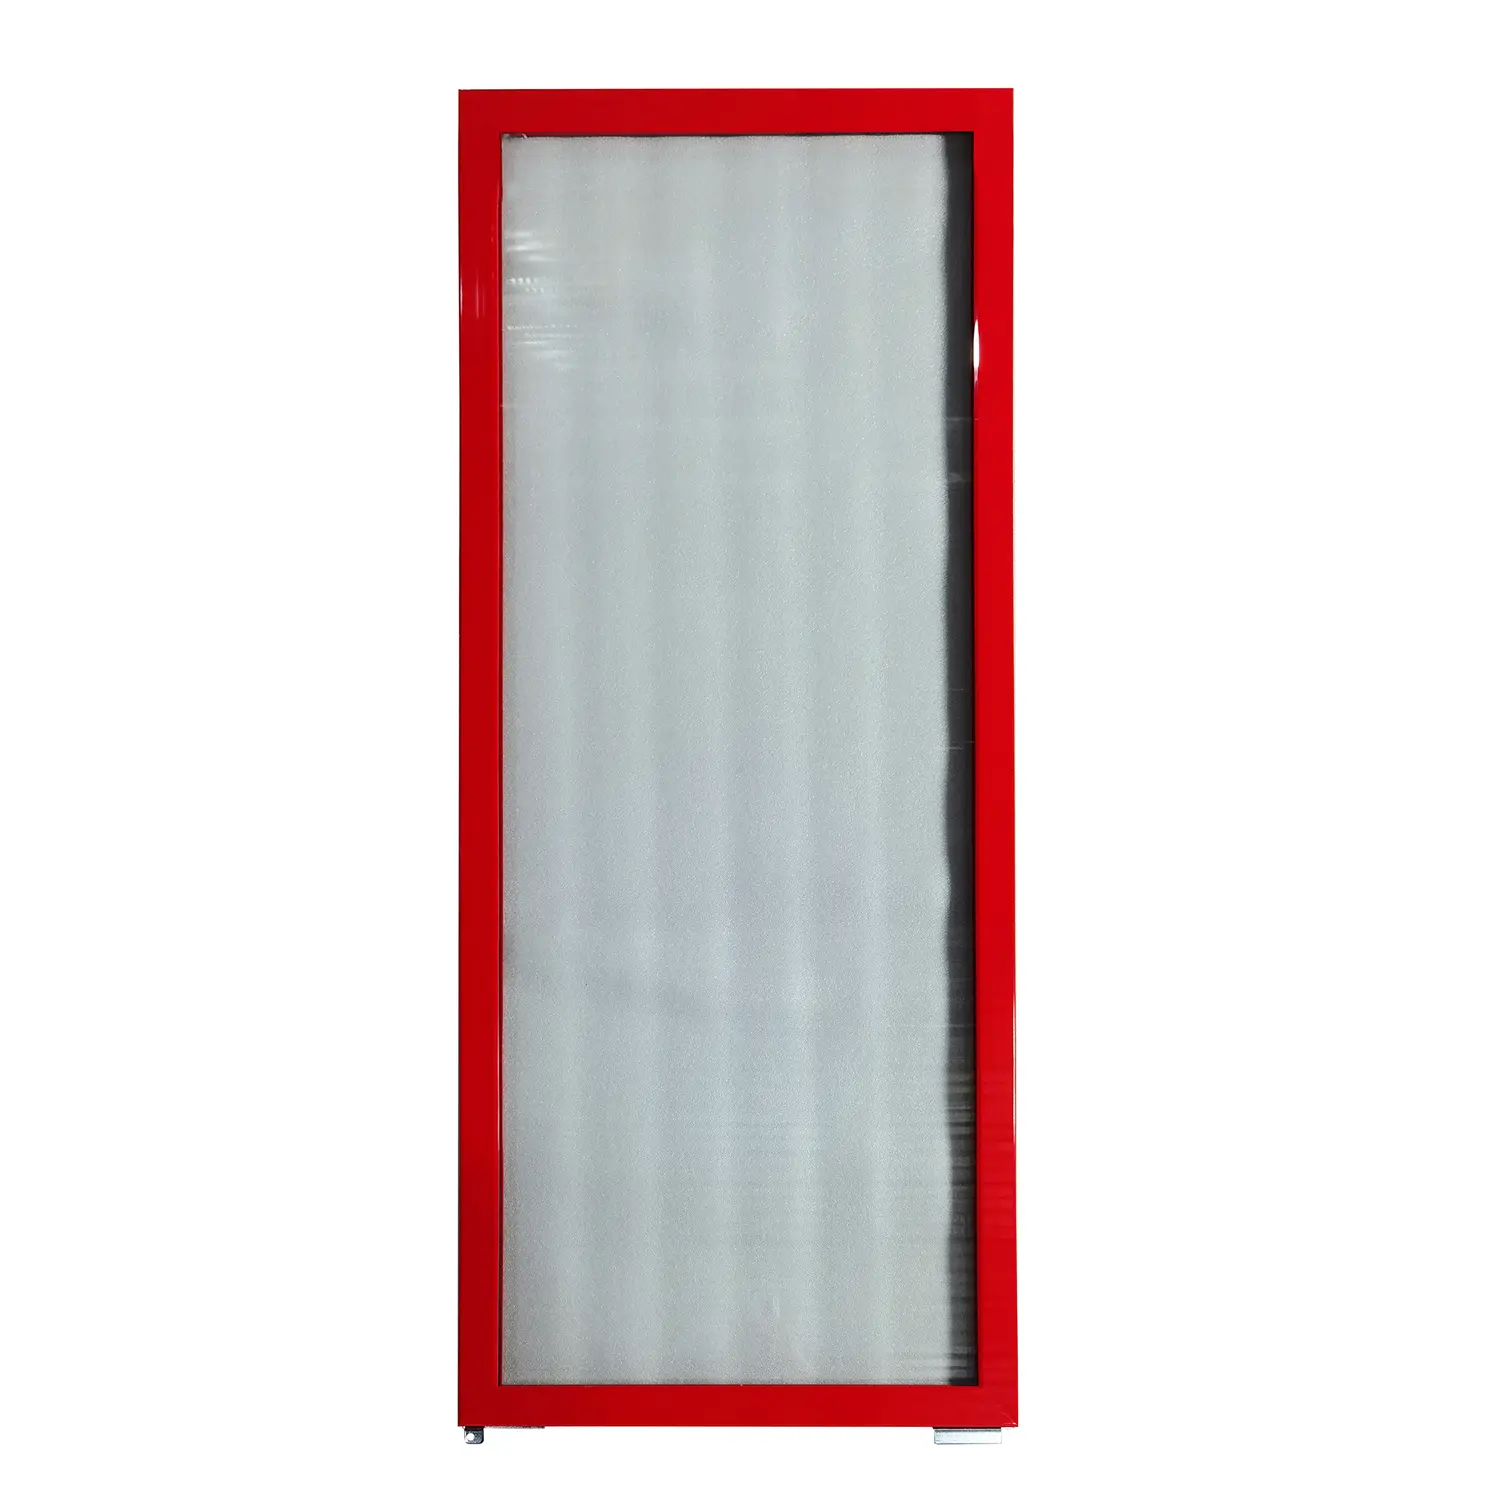 Customized Commercial Vertical Freezer Glass Doors by Yuebang Glass